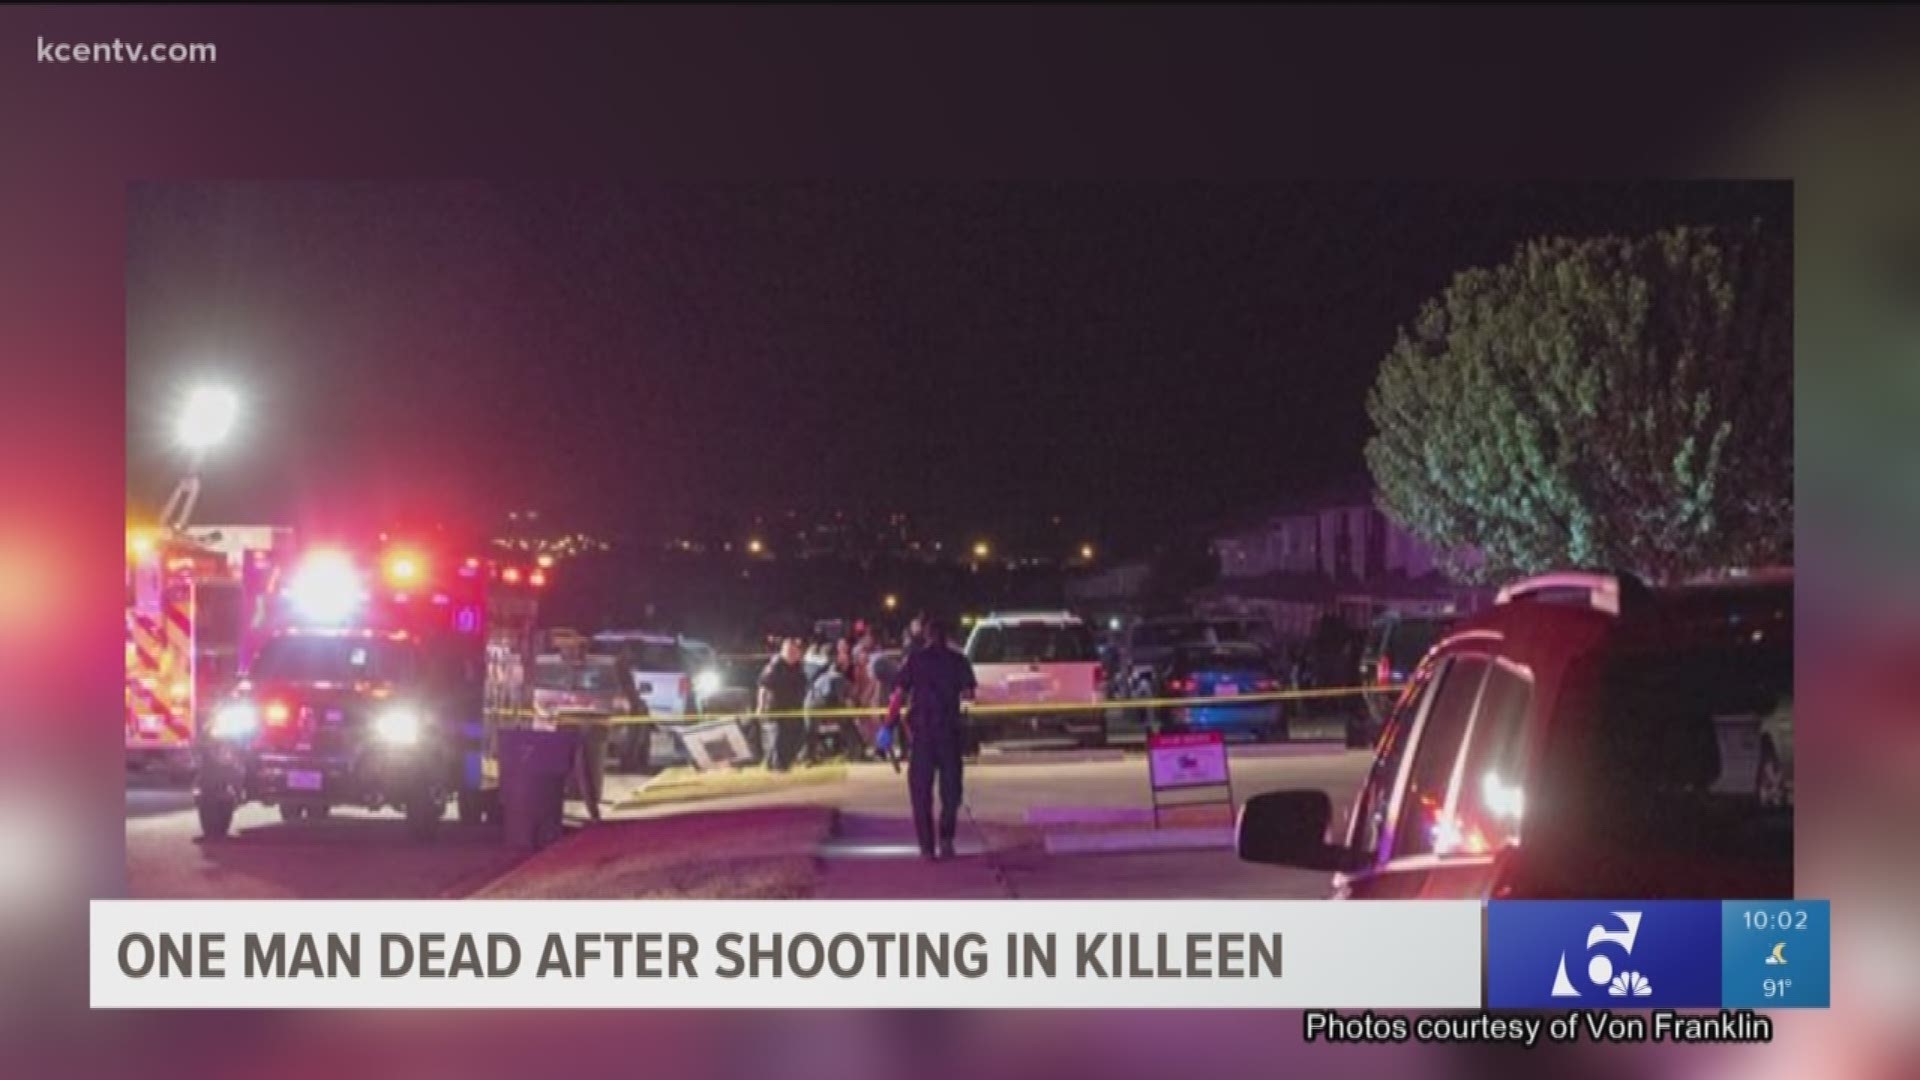 Police are looking for a suspect after a man died from a gunshot wound in Killeen.